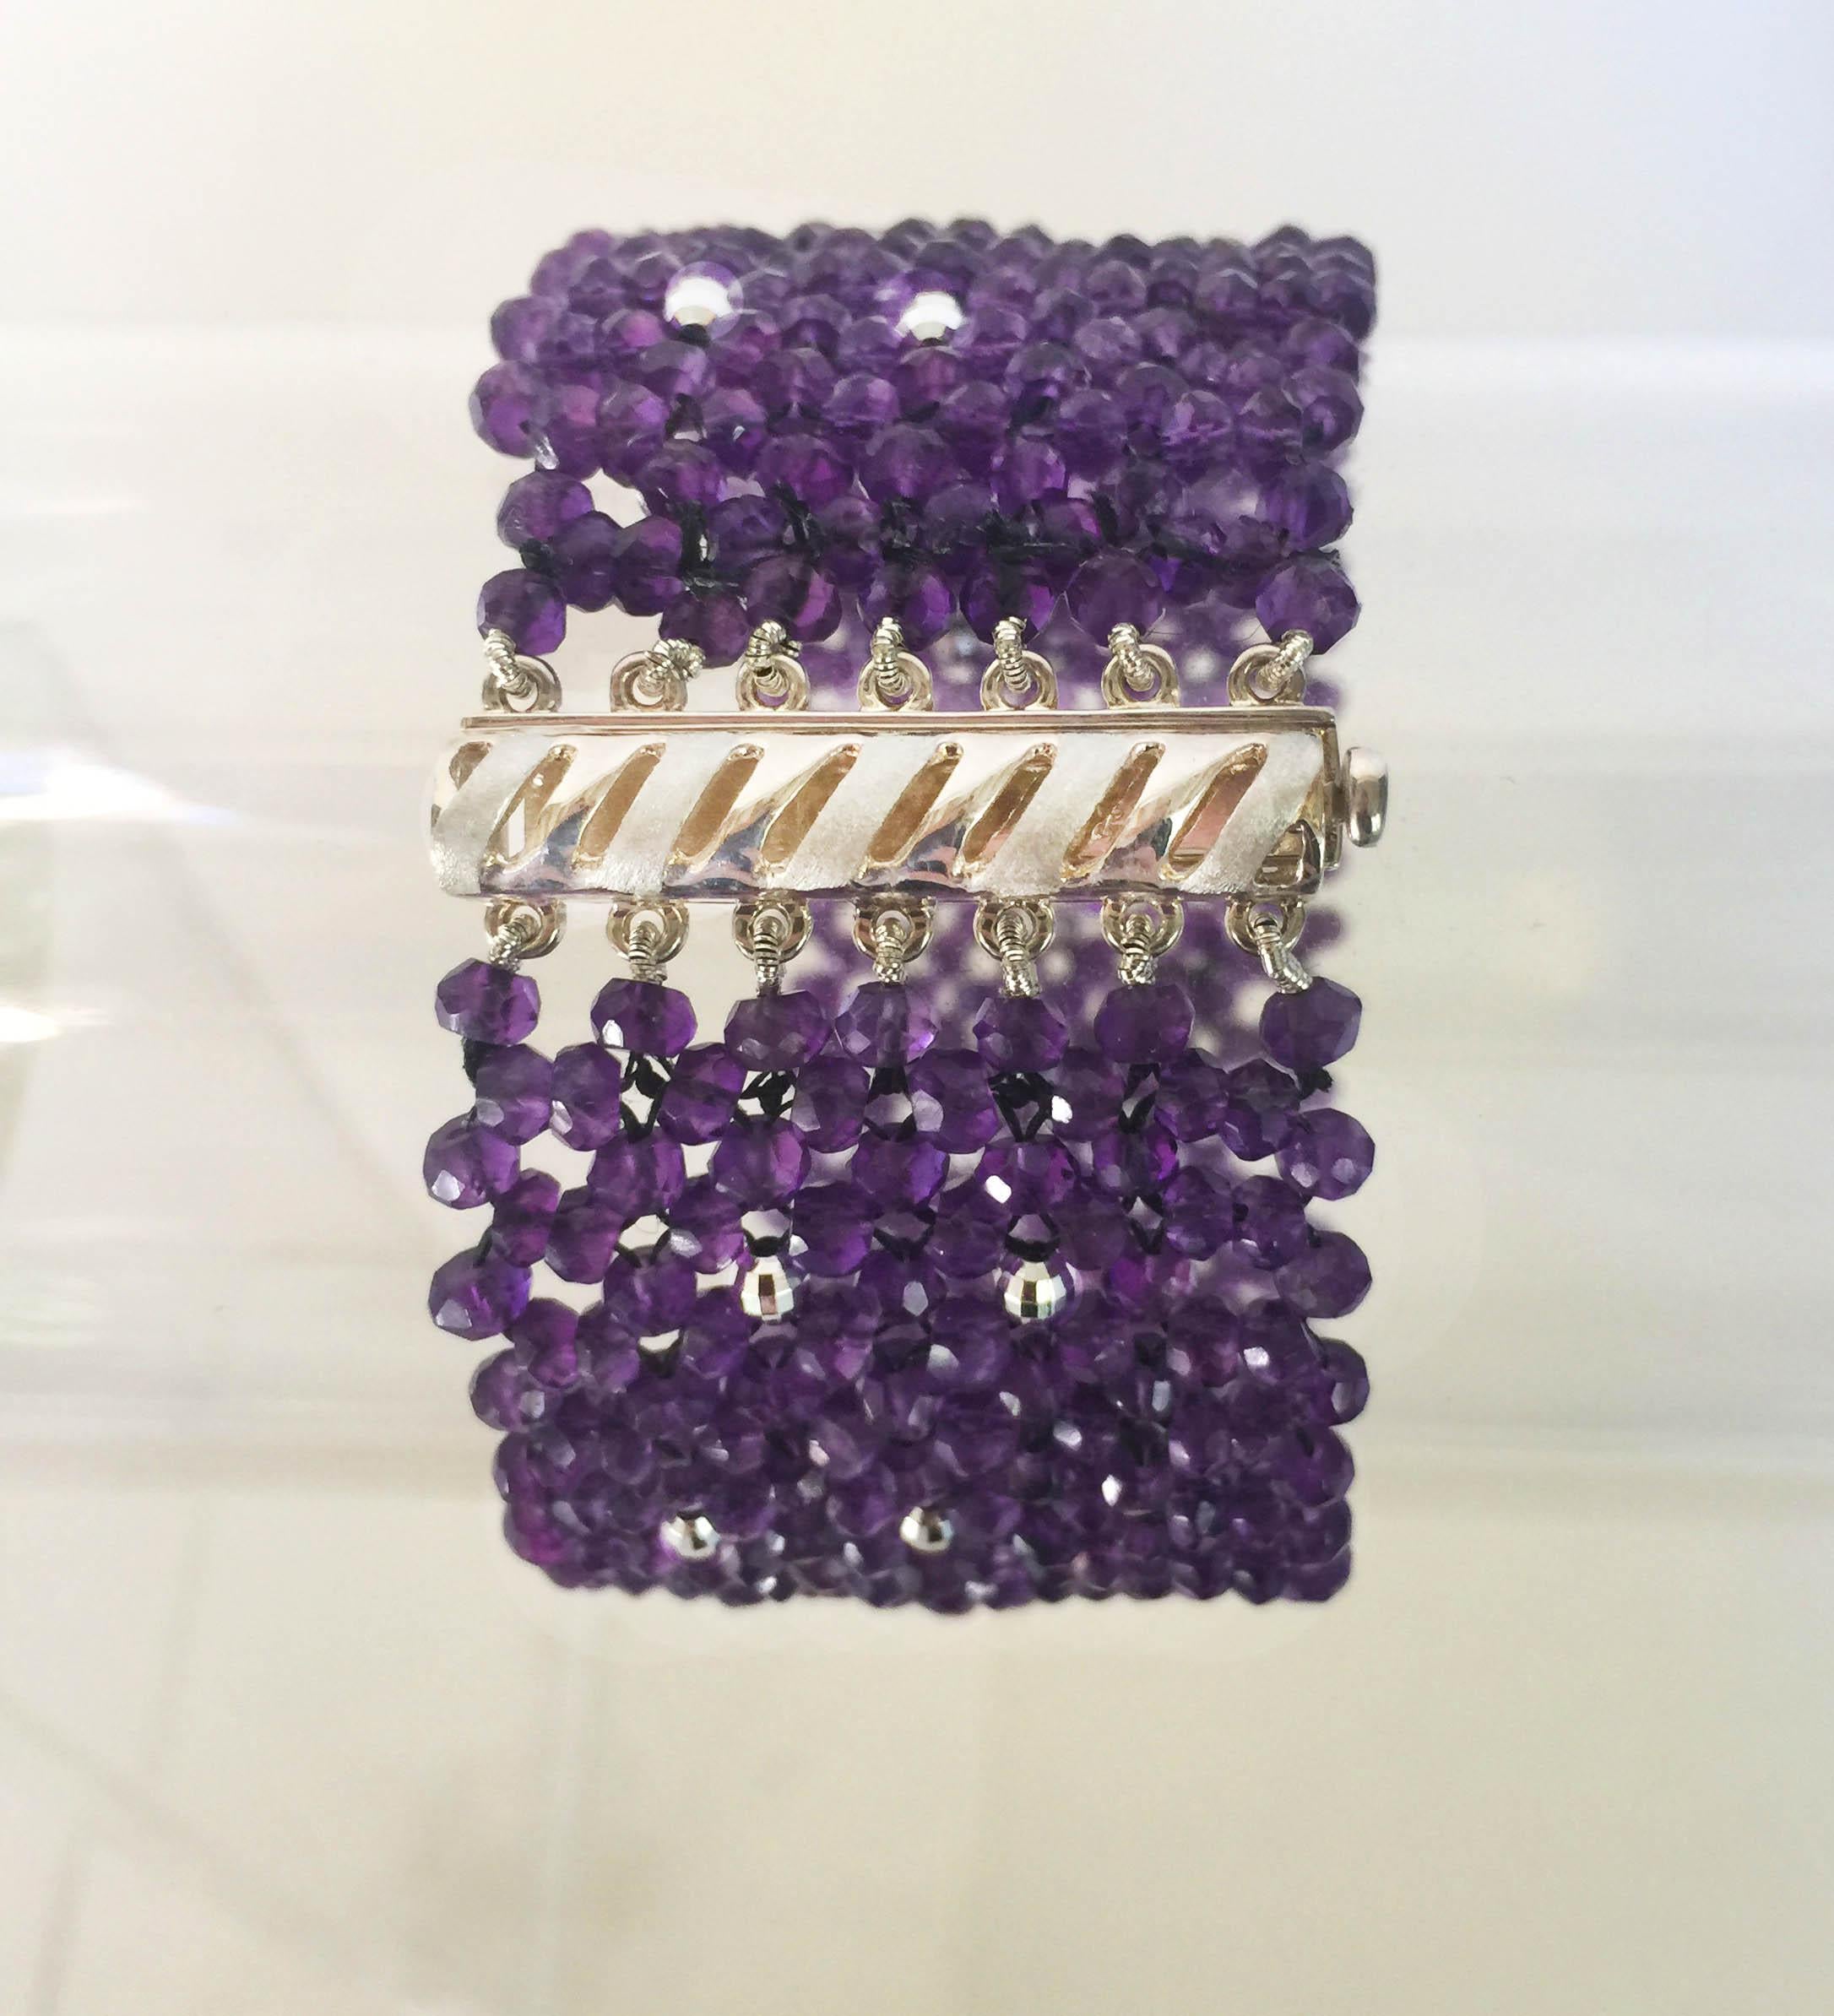 Artist Marina J. Woven Faceted Amethyst beads Cuff Bracelet with Sterling Silver Clasp 